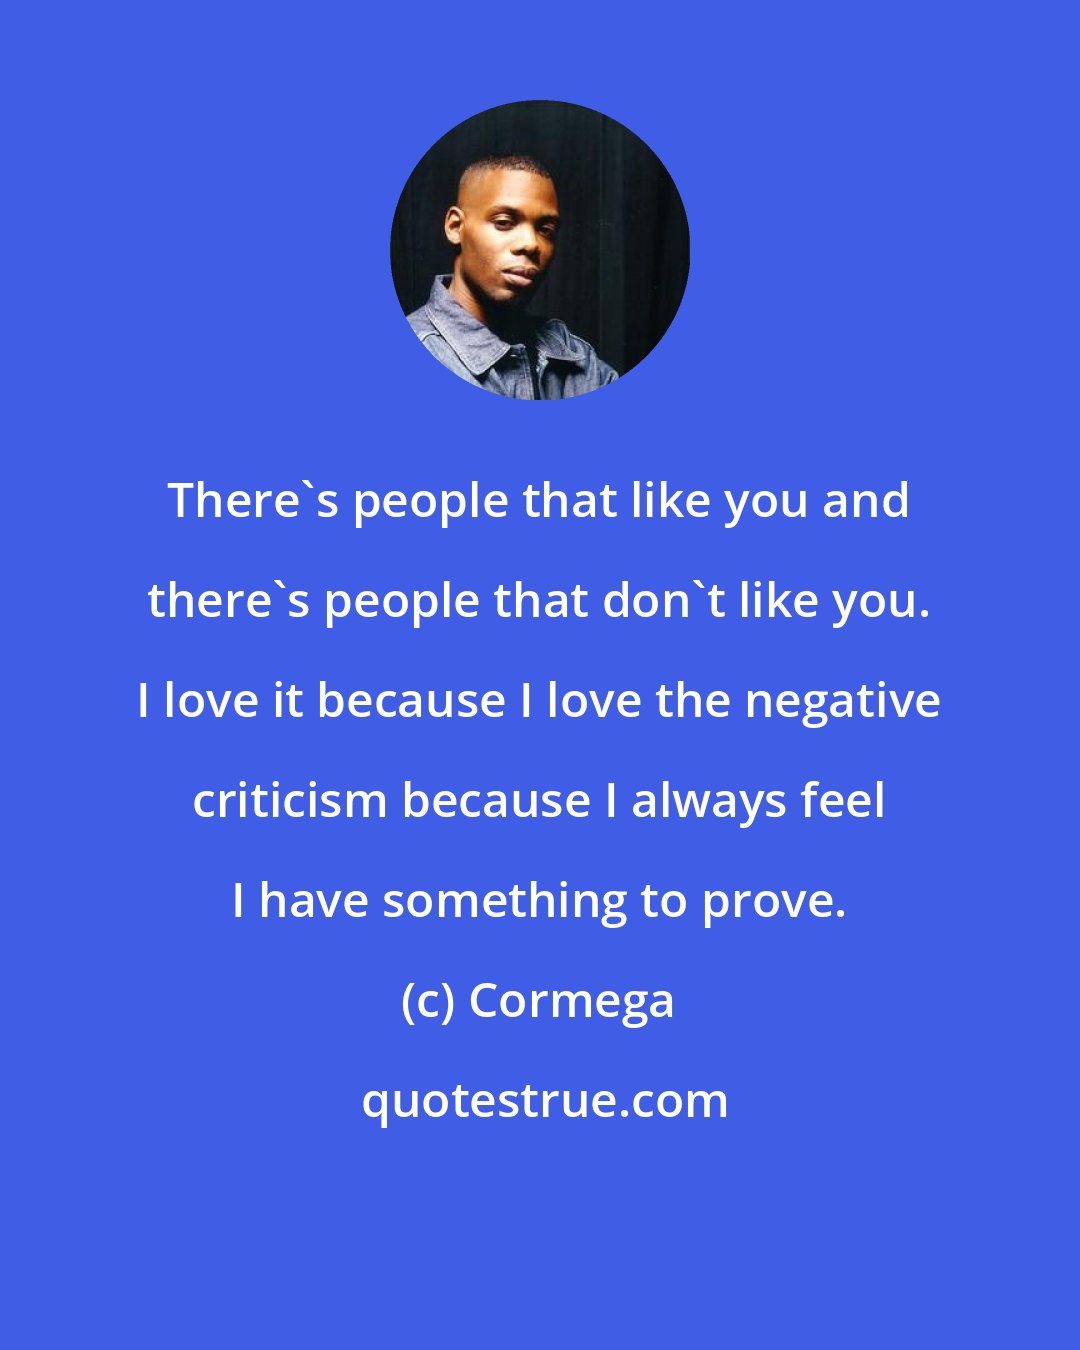 Cormega: There's people that like you and there's people that don't like you. I love it because I love the negative criticism because I always feel I have something to prove.